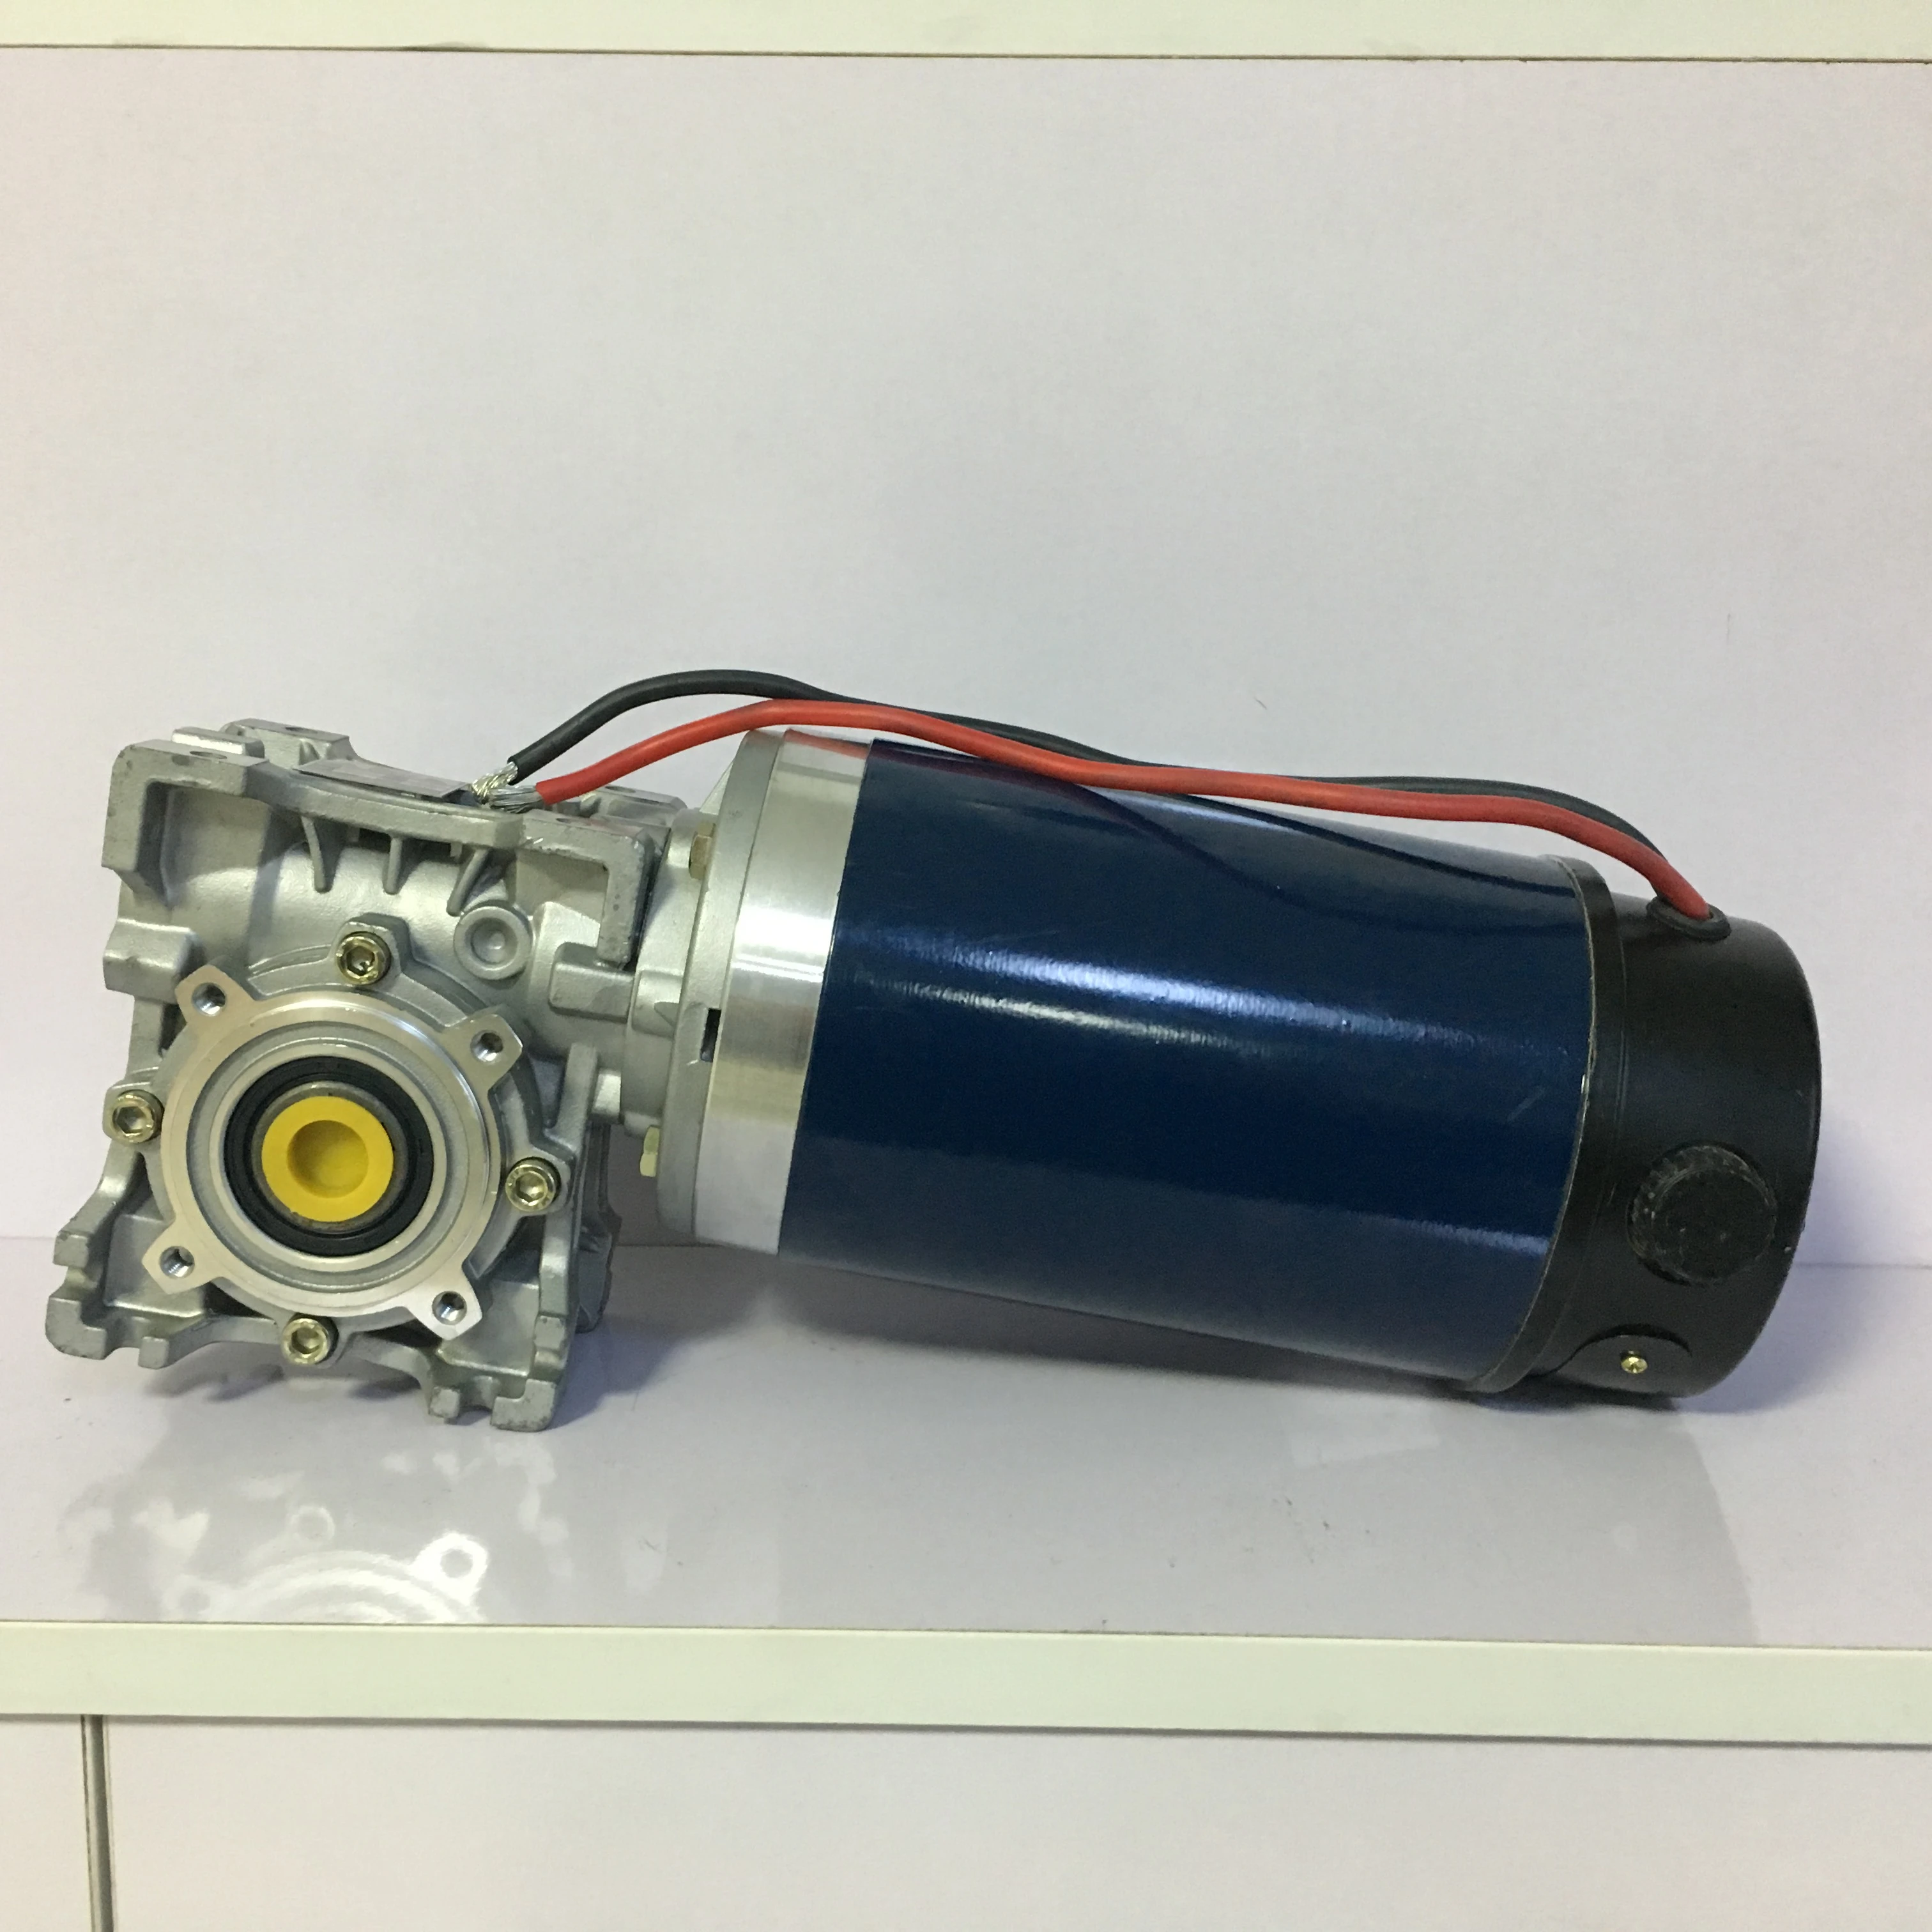 24VDC high power worm gear motor,high efficiency and big output torque